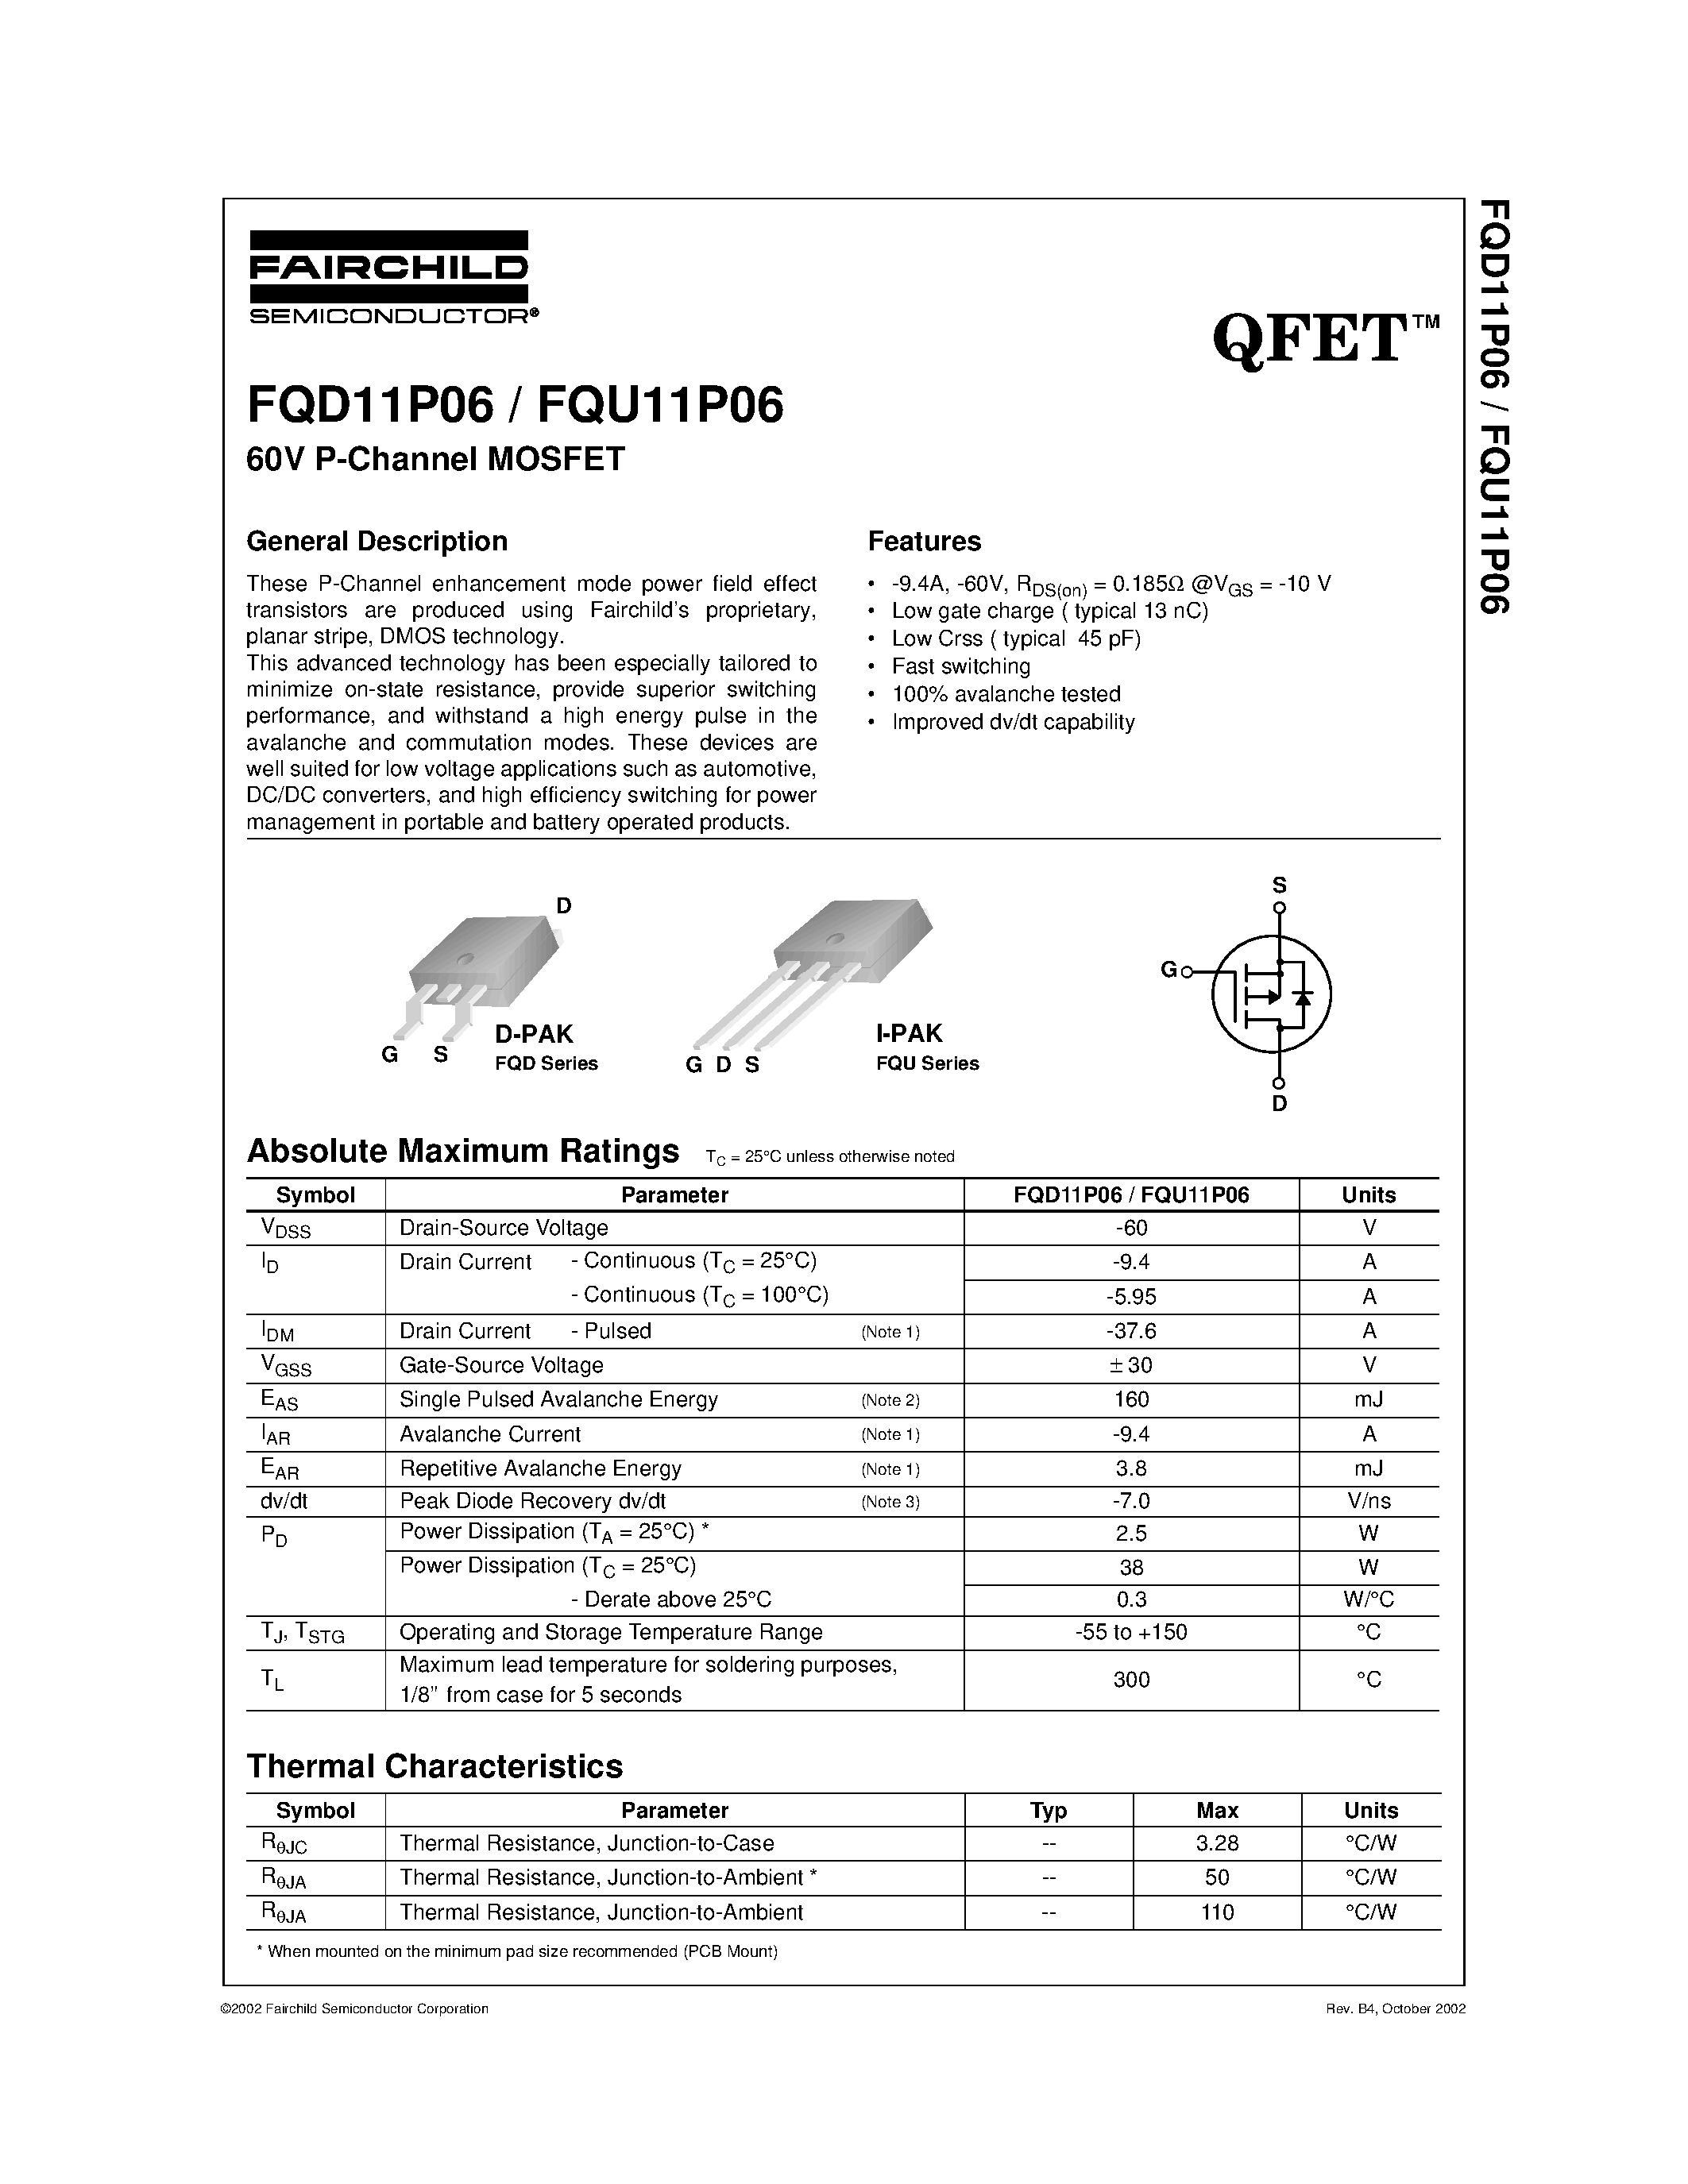 Datasheet FQD11P06 - 60V P-Channel MOSFET page 1